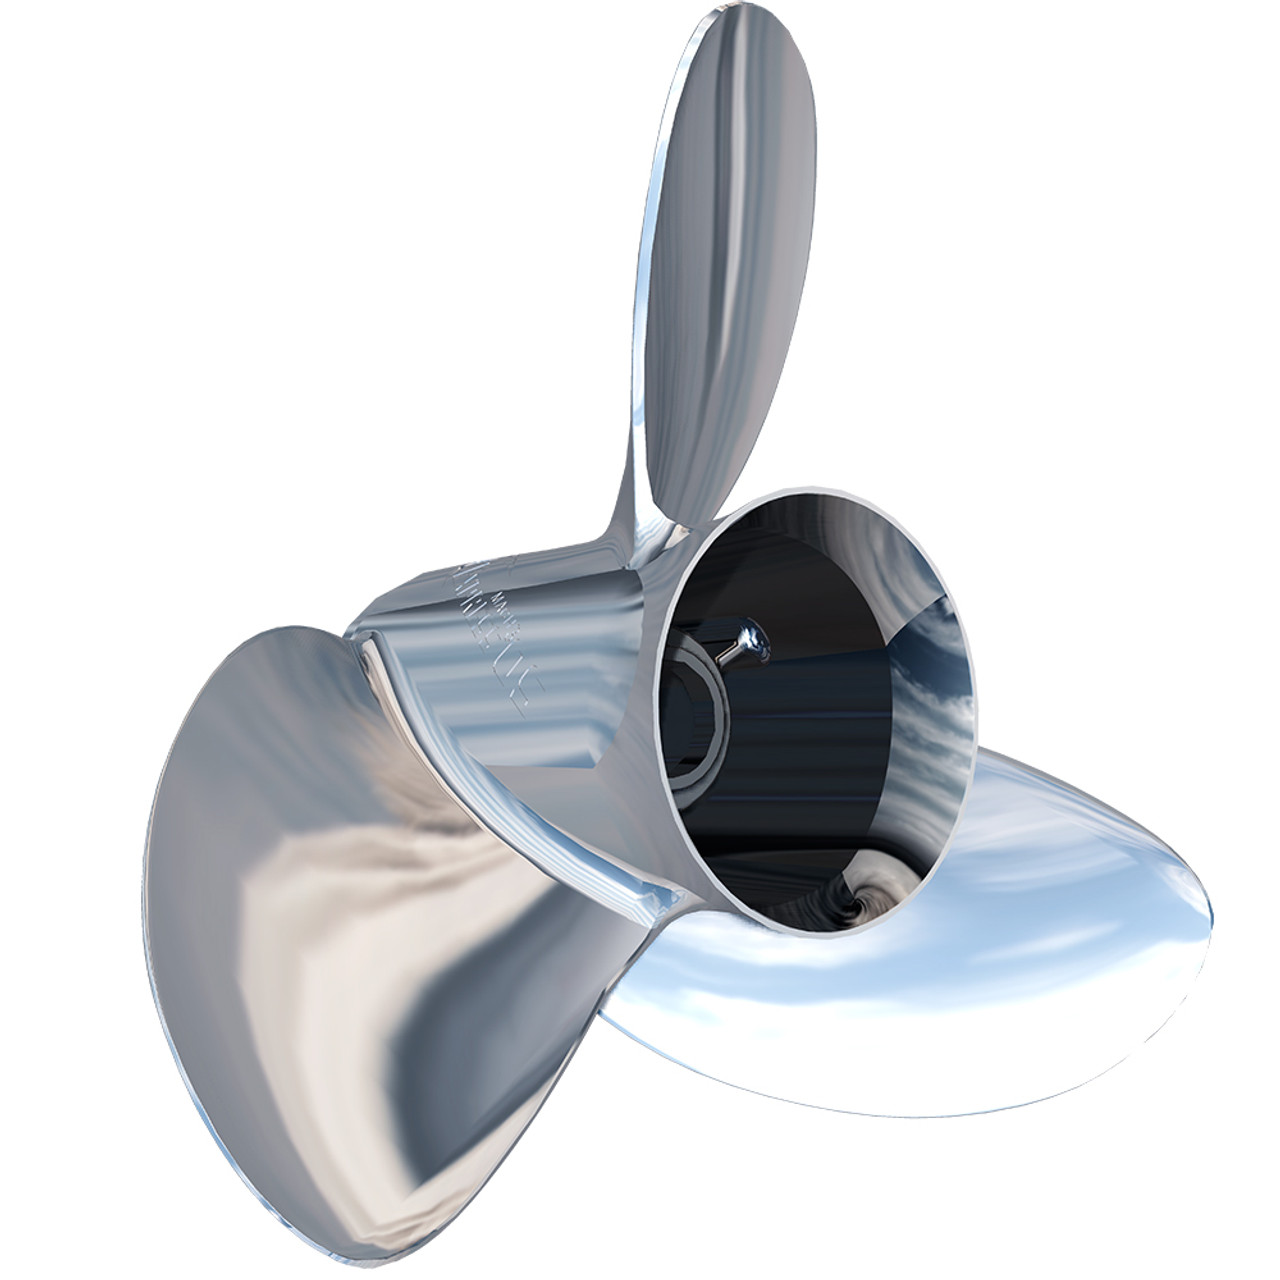 Turning Point Express Mach3 Right Hand Stainless Steel Propeller - OS-1613 - 3-Blade - 15.625" x 13" [31511310]